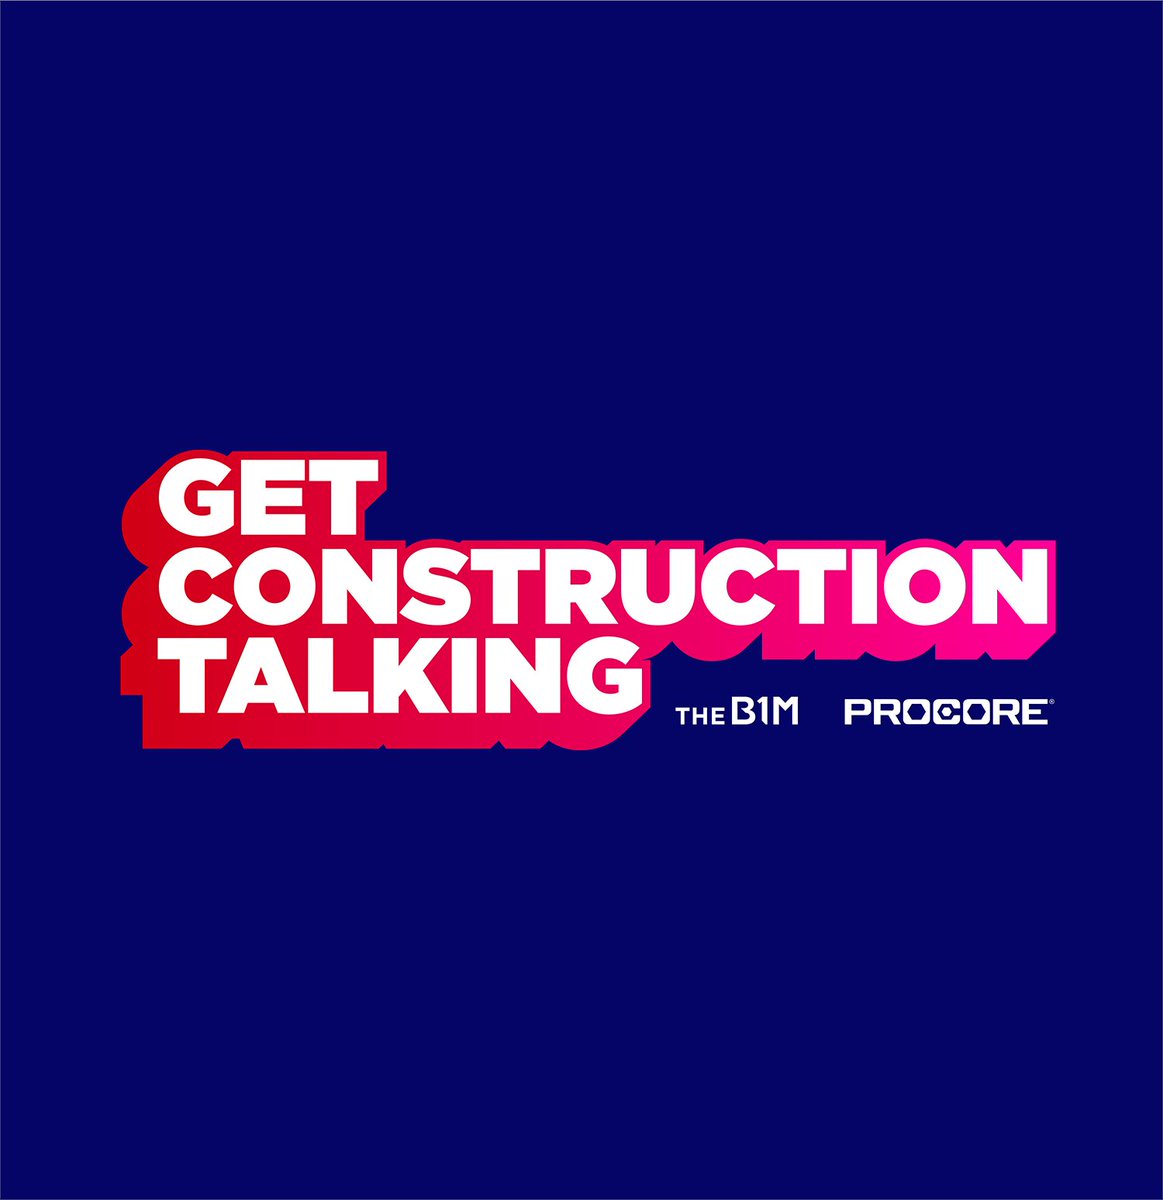 We’d love your help. With our partners at @TheB1M, we're aiming to raise $1 million for @theCIASP, @LighthouseClub_, @MatesInMind, @construct_sport, and @MATESConstruct. You can donate to support these amazing construction mental health charities at getconstructiontalking.org/donate.